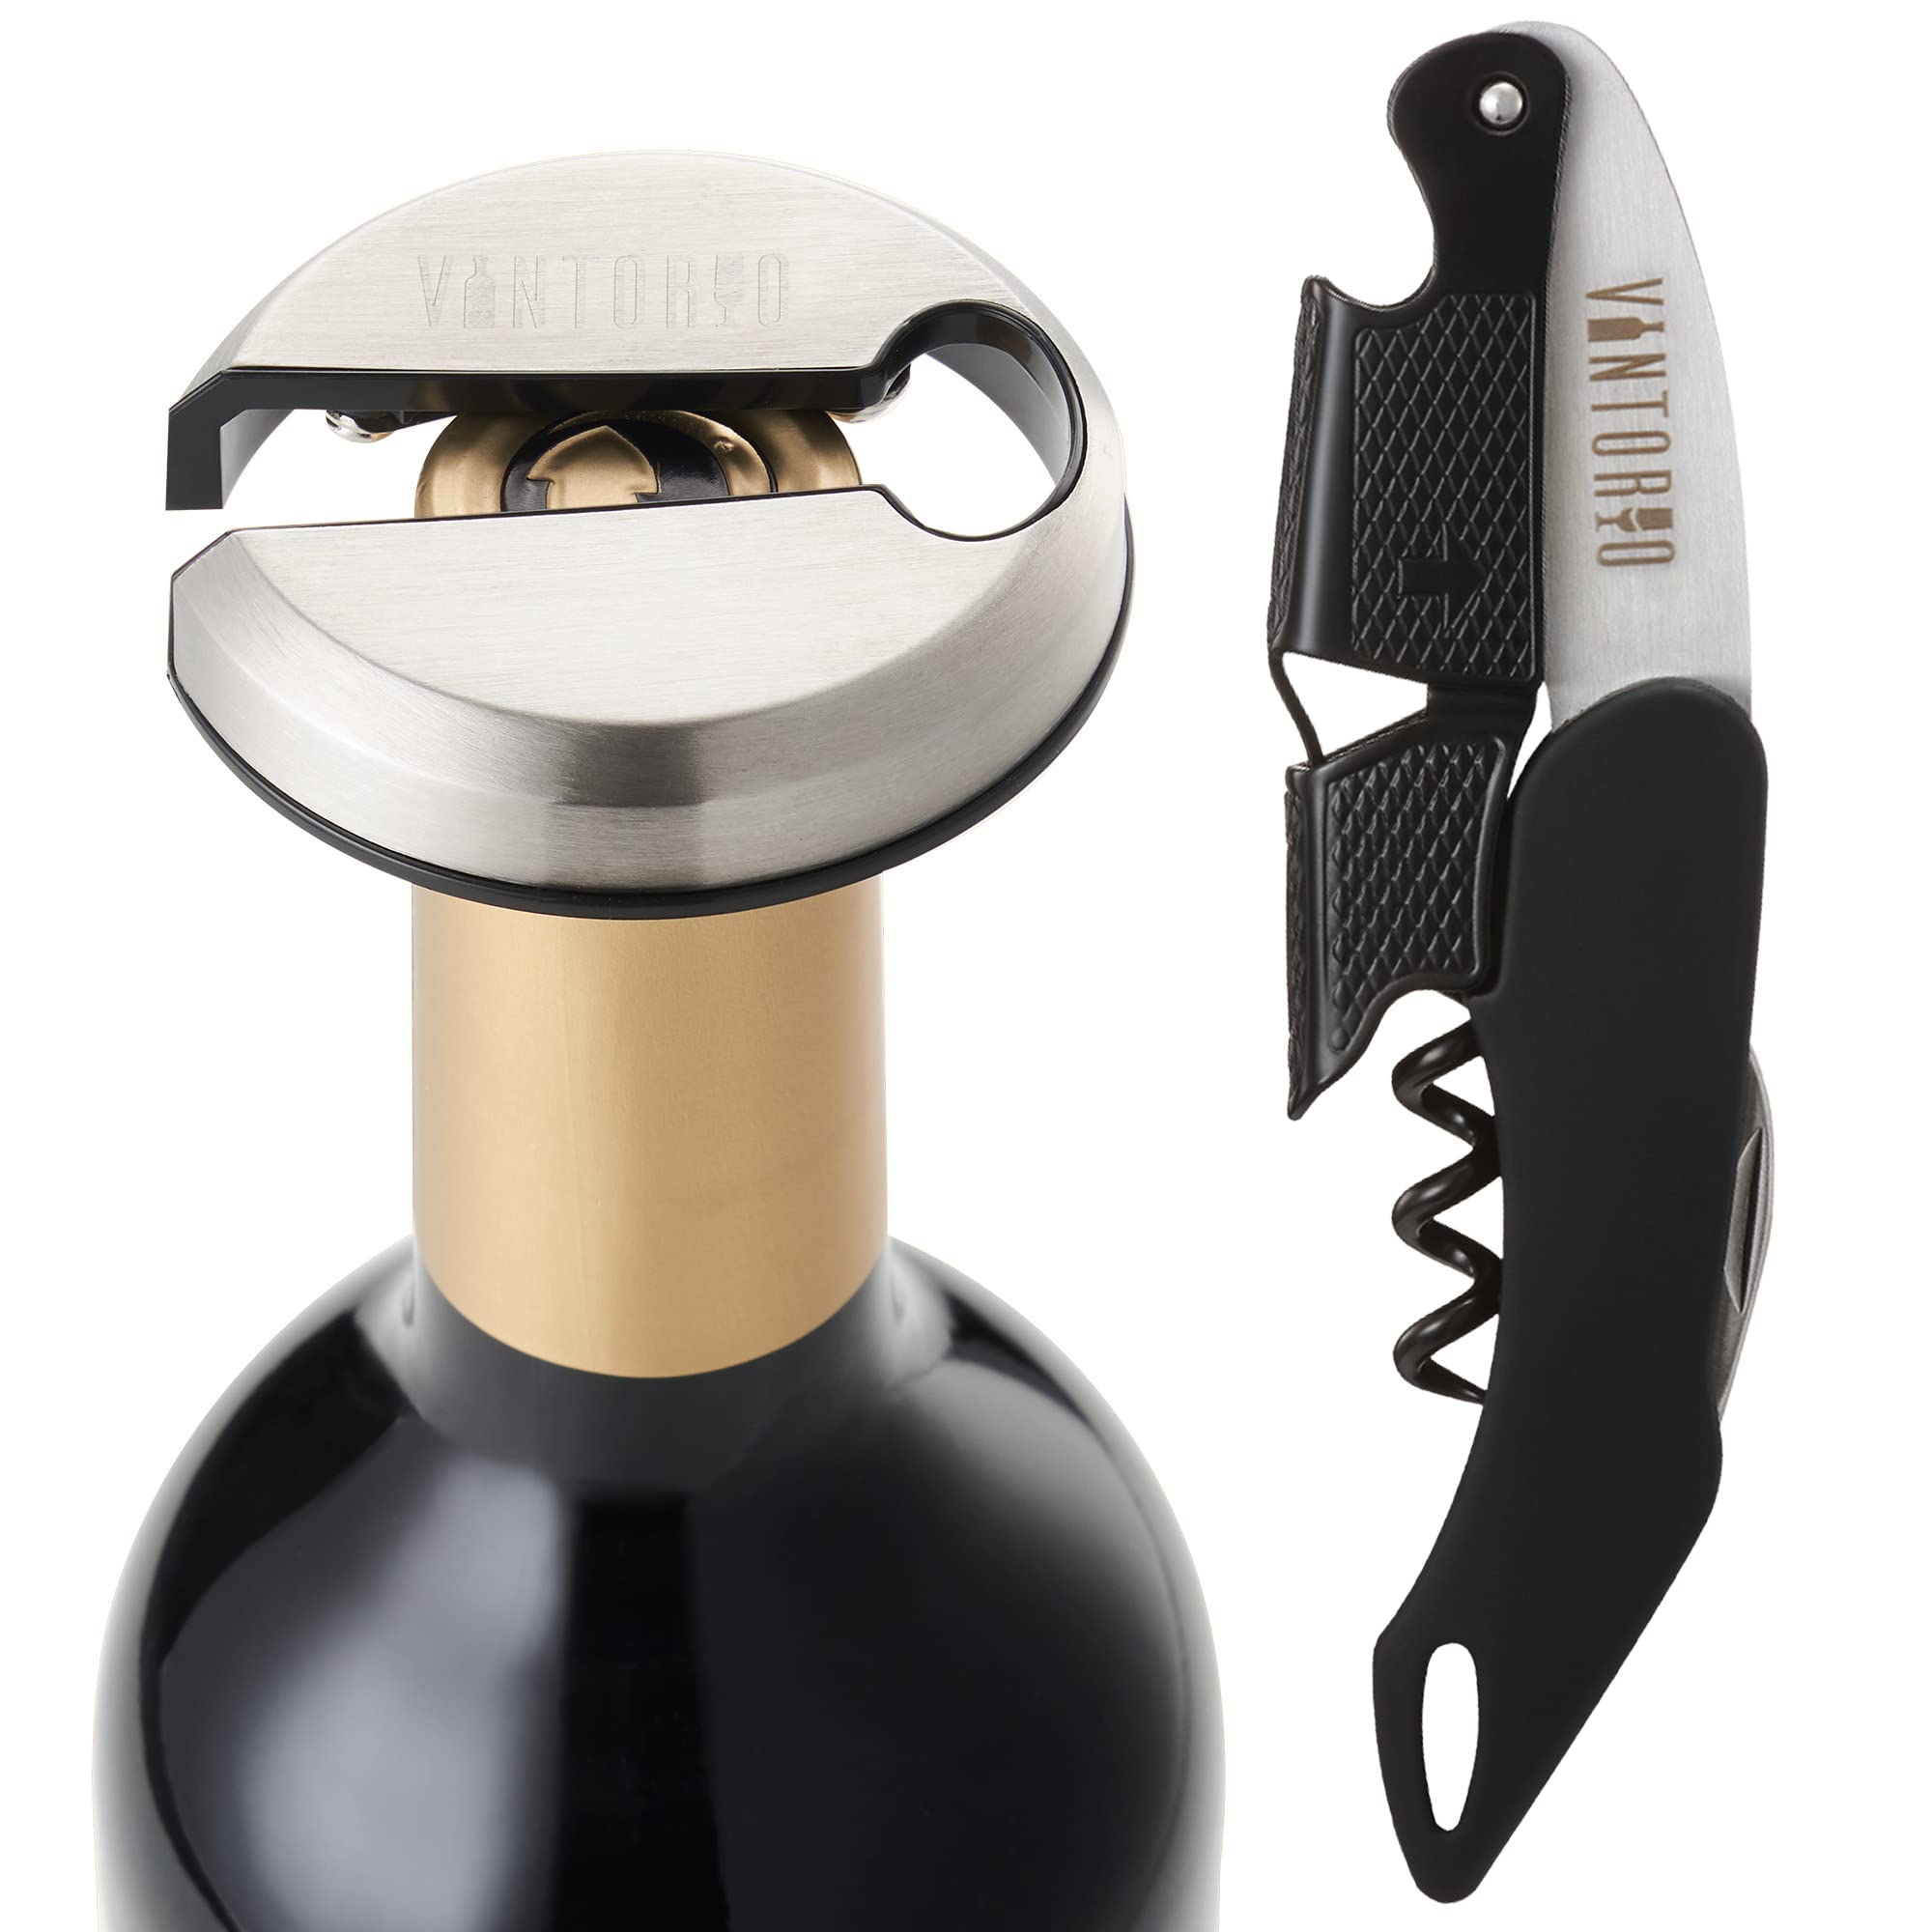 Server's Wine Key and Metal Wine Foil Cutter Bundle by Vintorio